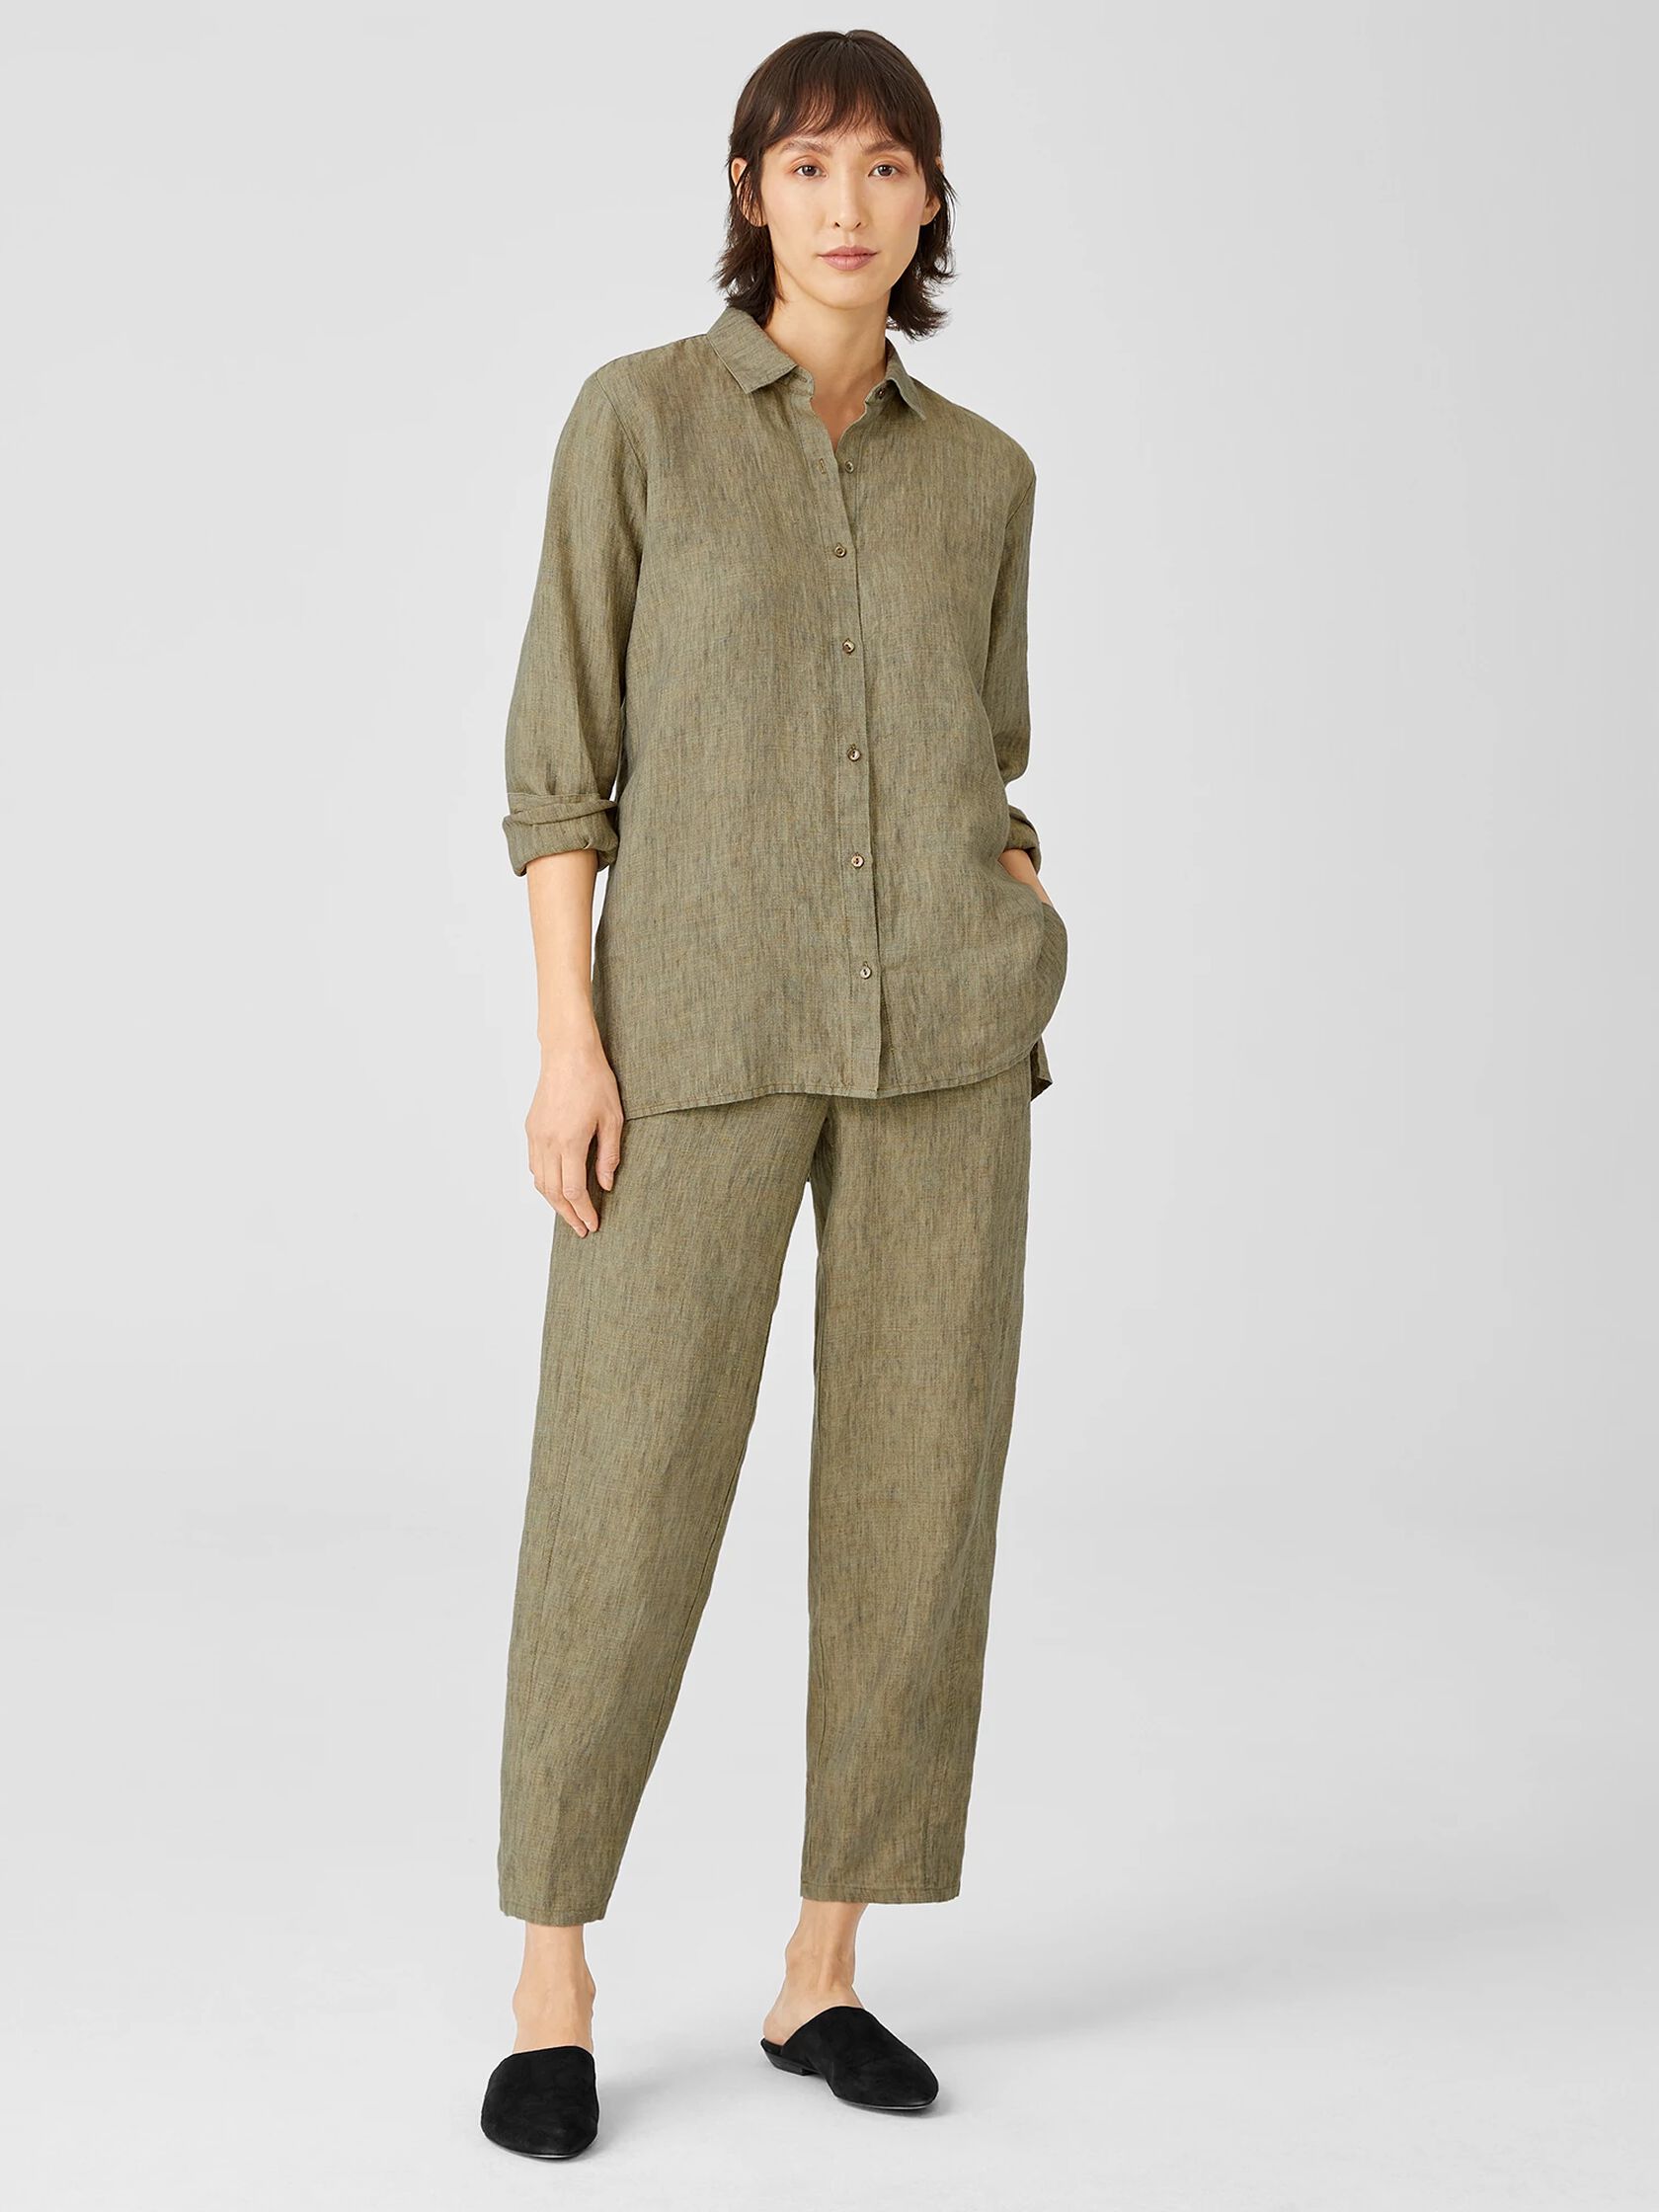 Washed Organic Linen Delave Classic Collar Shirt | EILEEN FISHER